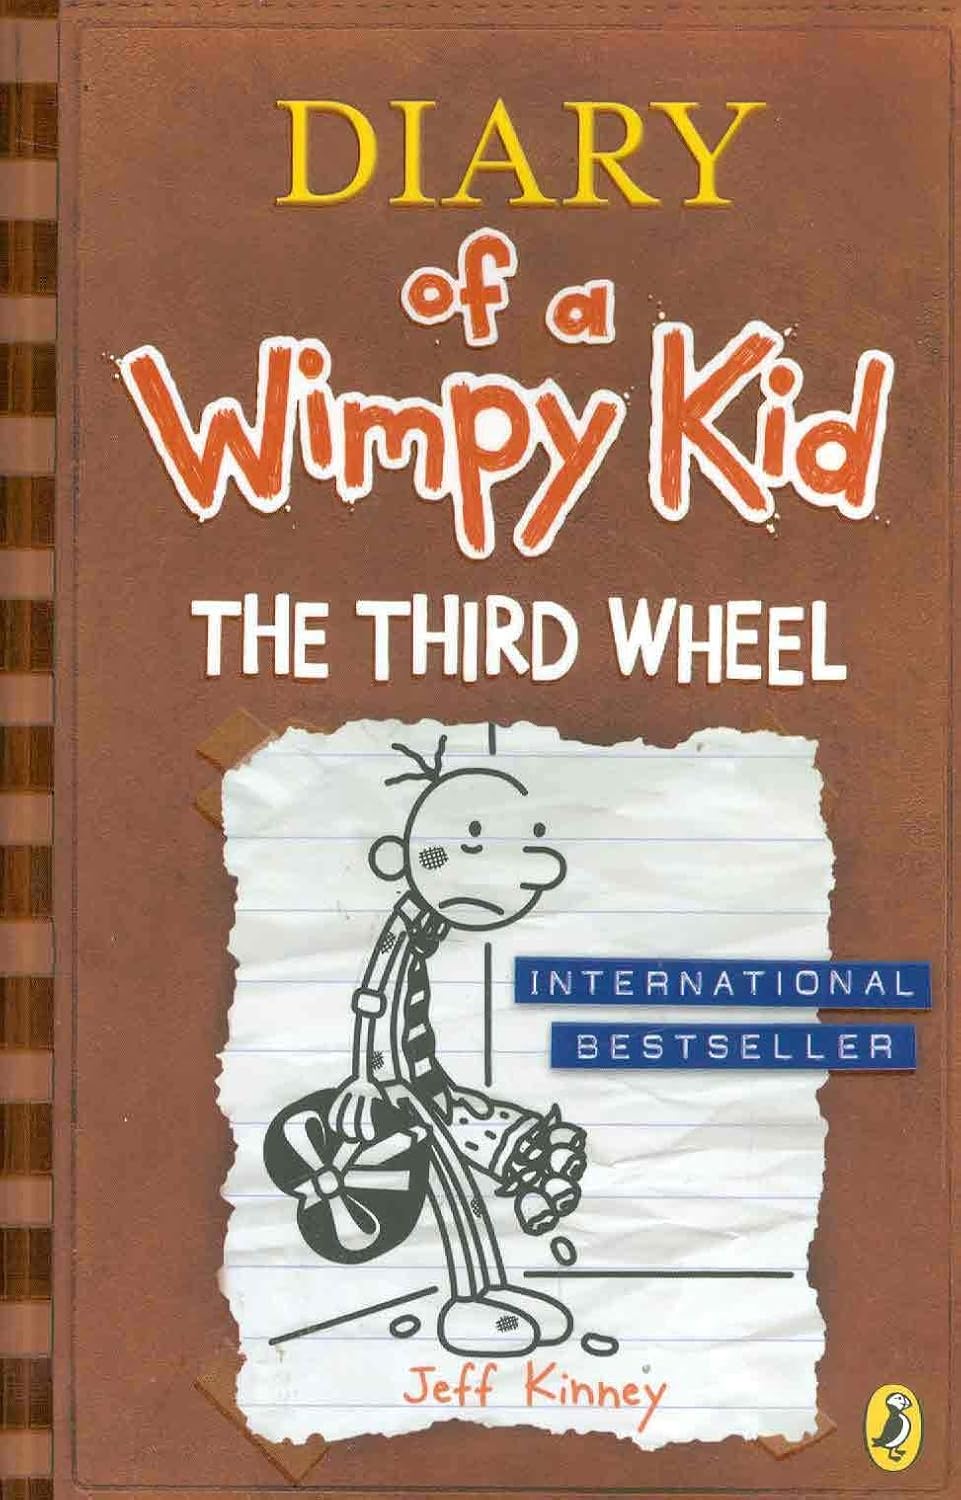 Diary Of A Wimpy Kid The Third Wheel Book 7